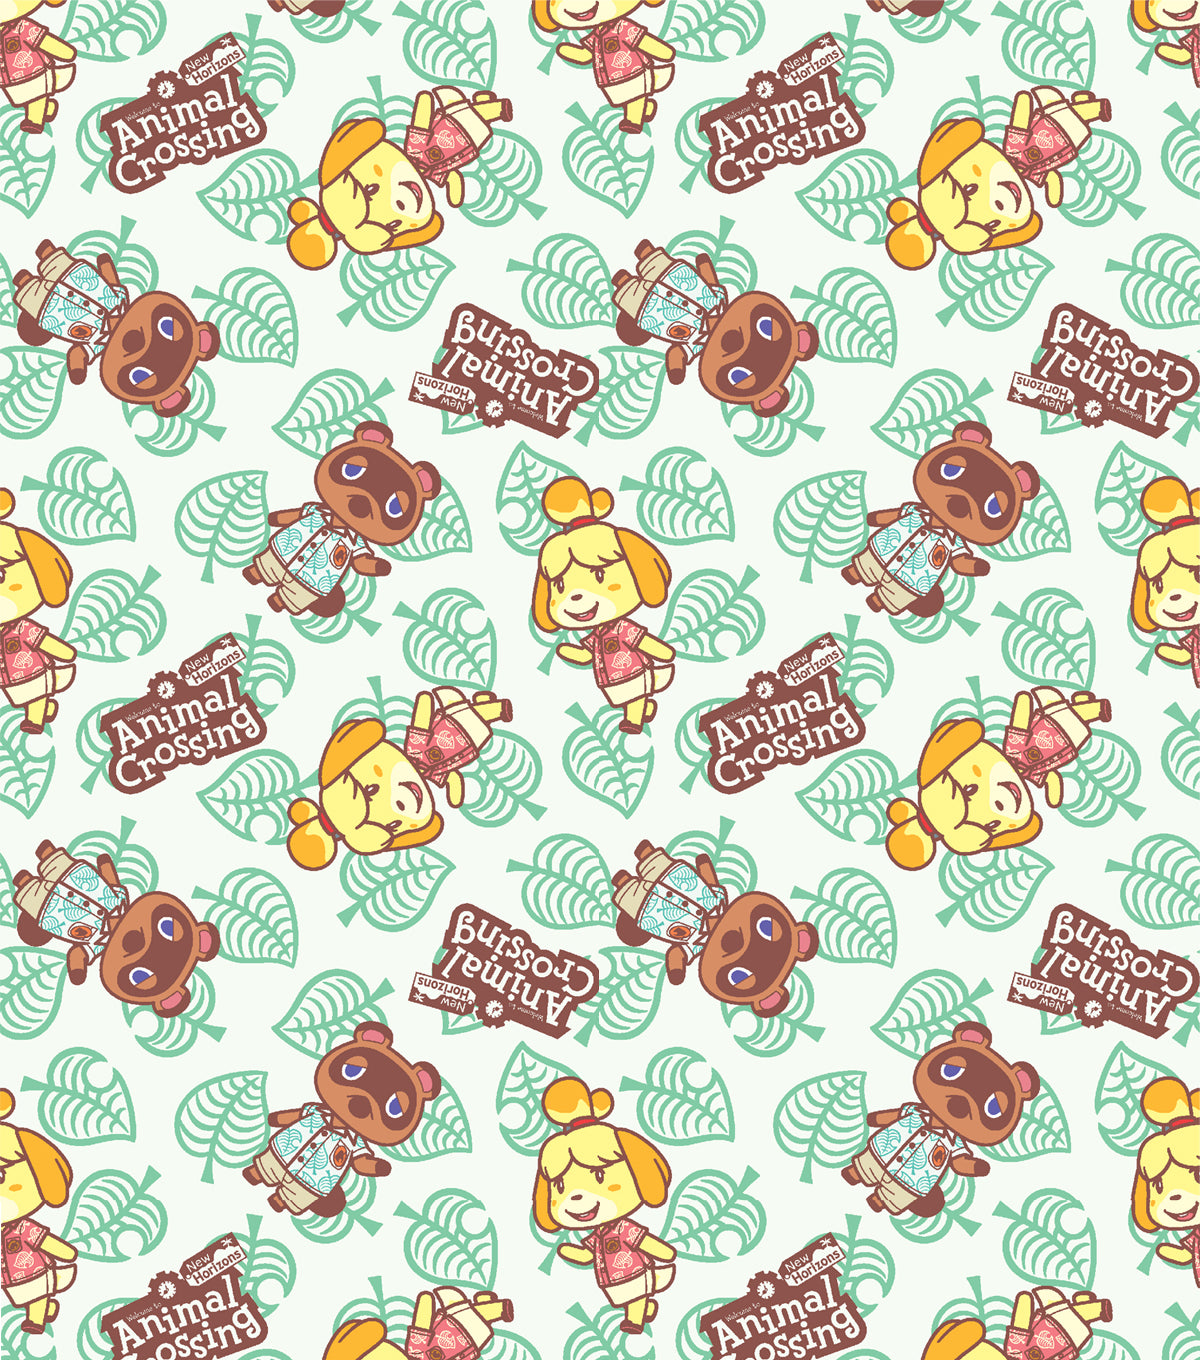 Nintendo Animal Crossing New Horizons Isabelle and Tom Nook Fabric